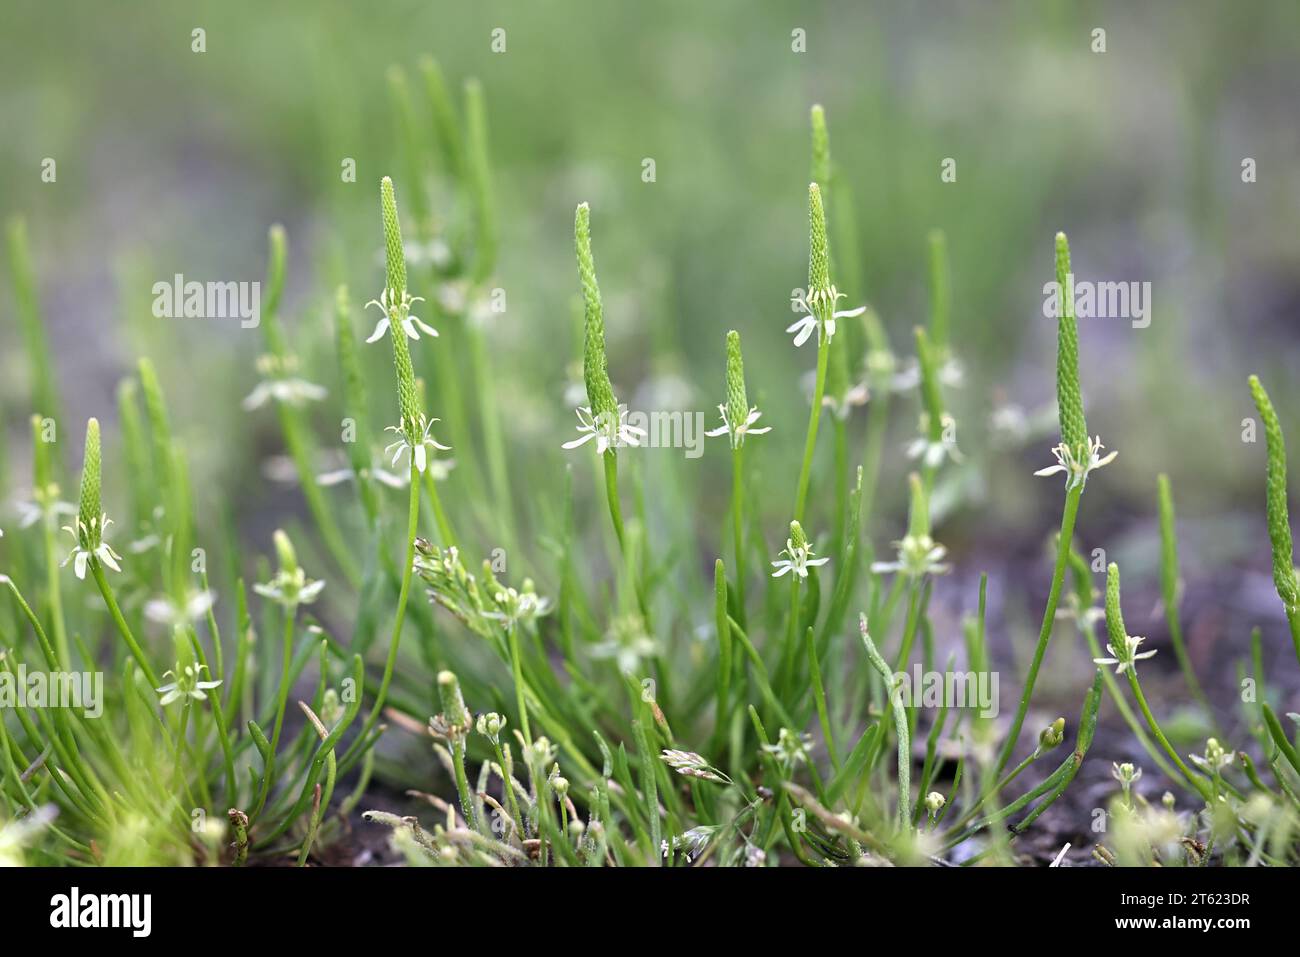 Myosurus minimus, commonly known as tiny mousetail, wild plant from Finland Stock Photo